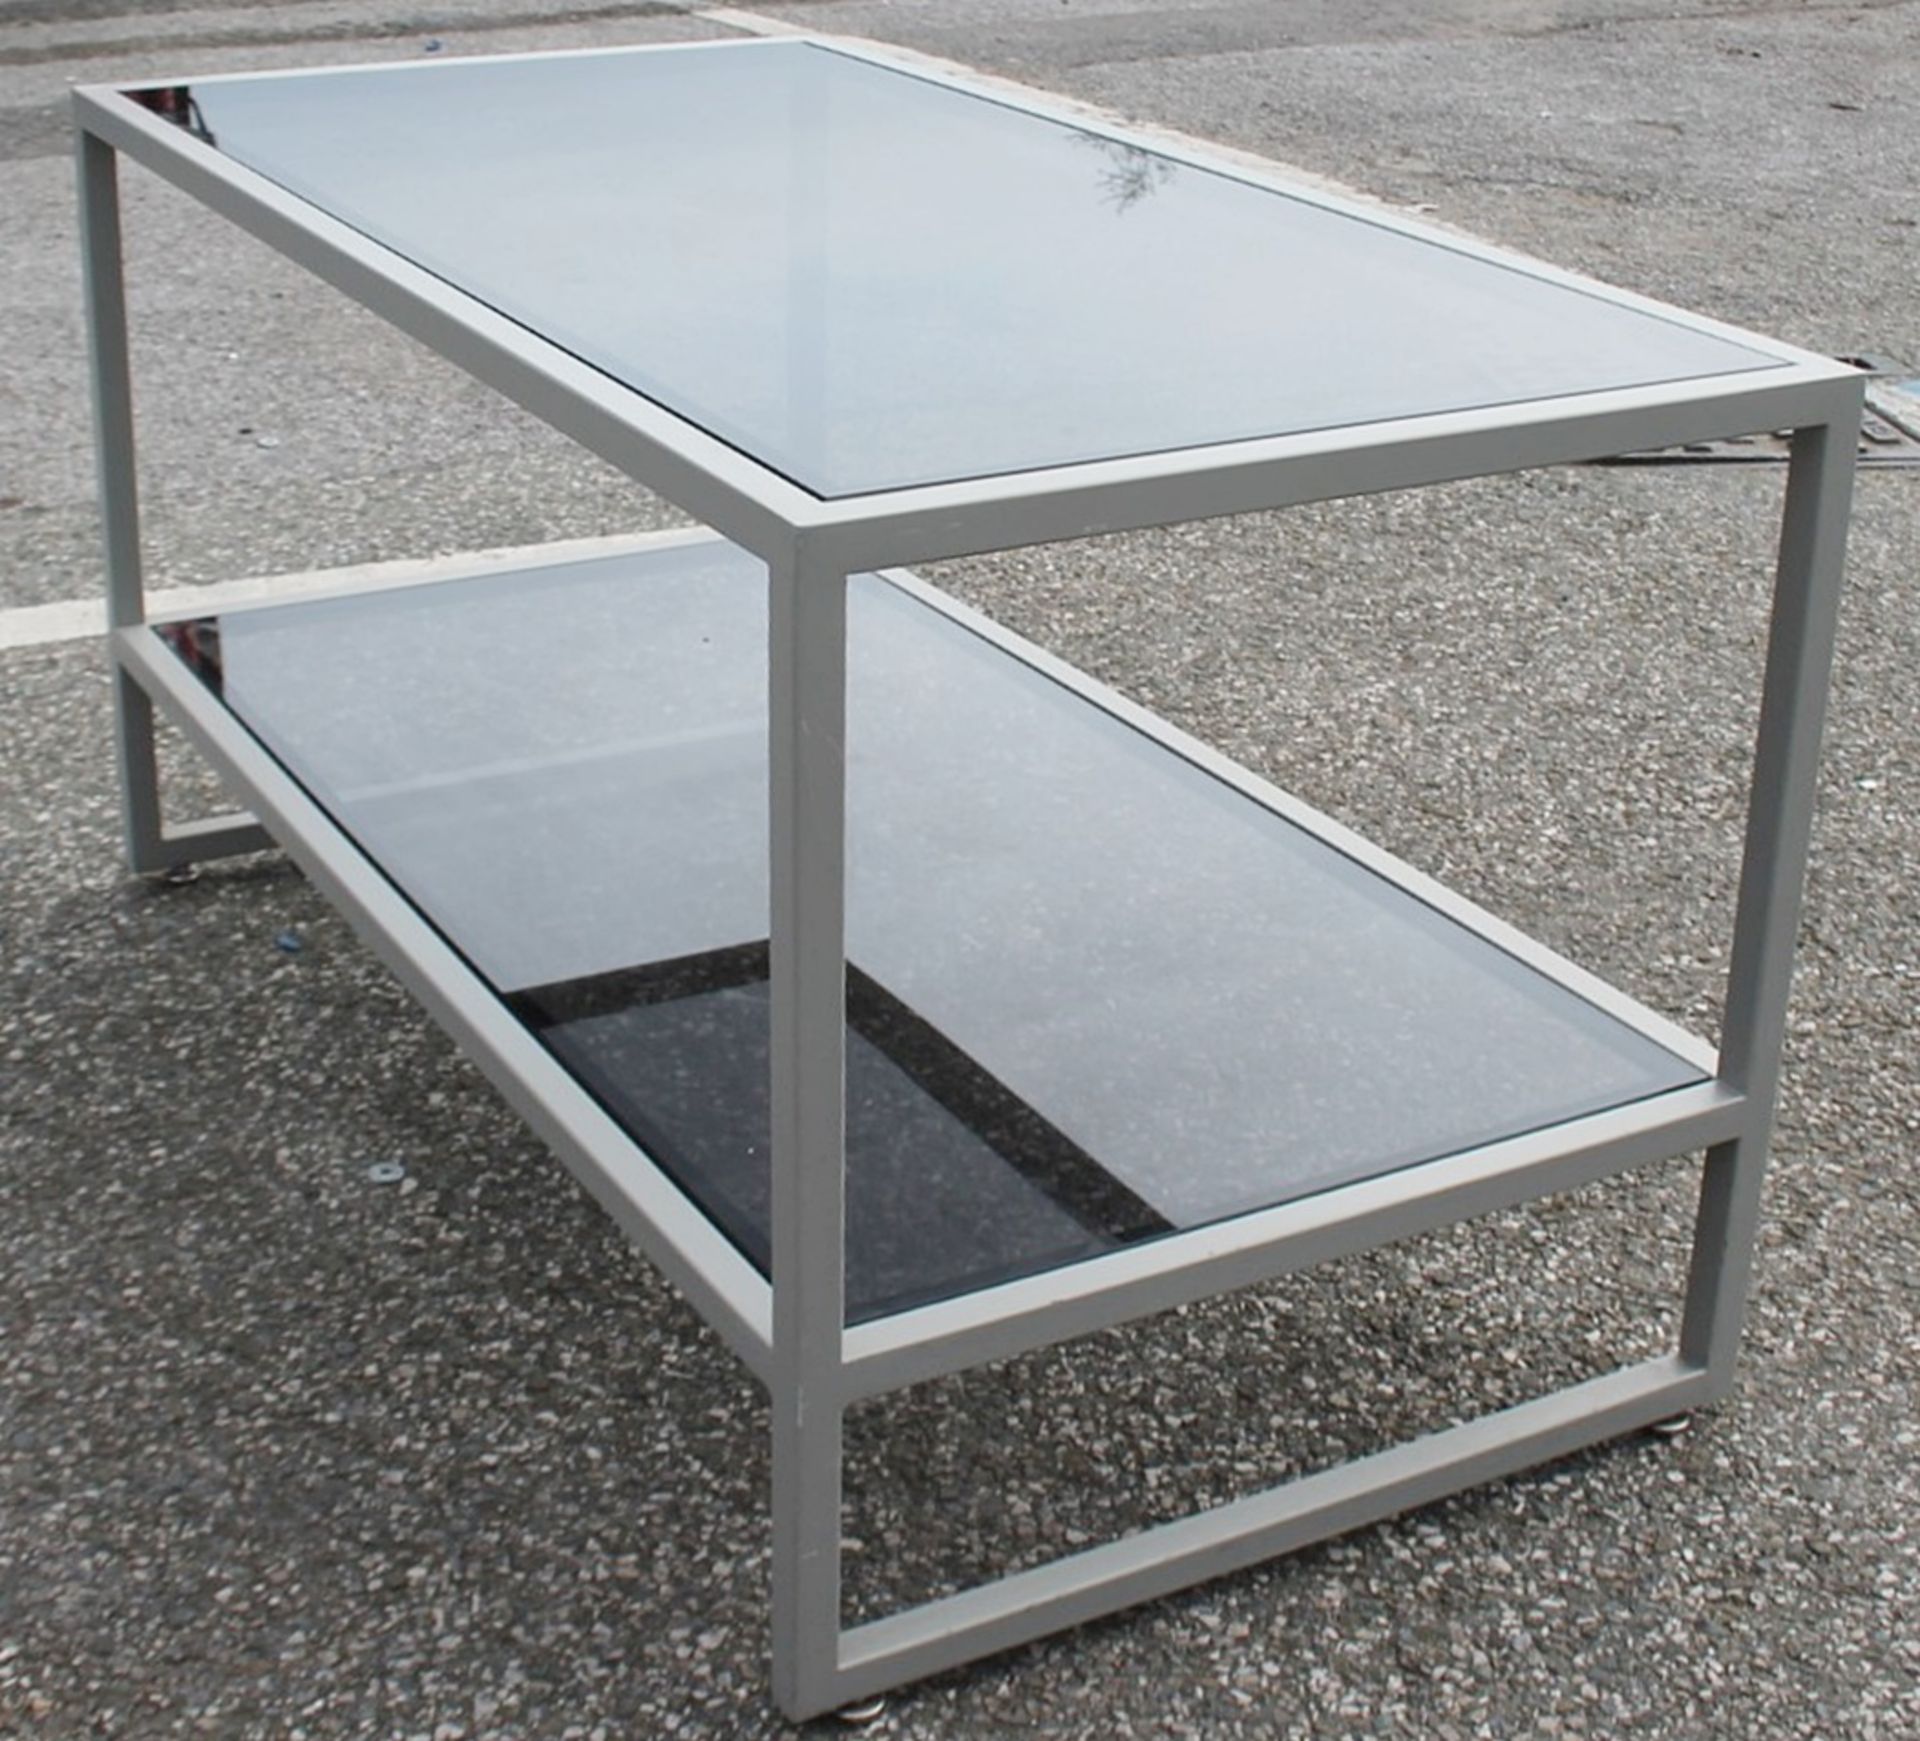 1 x Commercial Display Table With Tinted Glass Top And Undershelf - Image 3 of 4